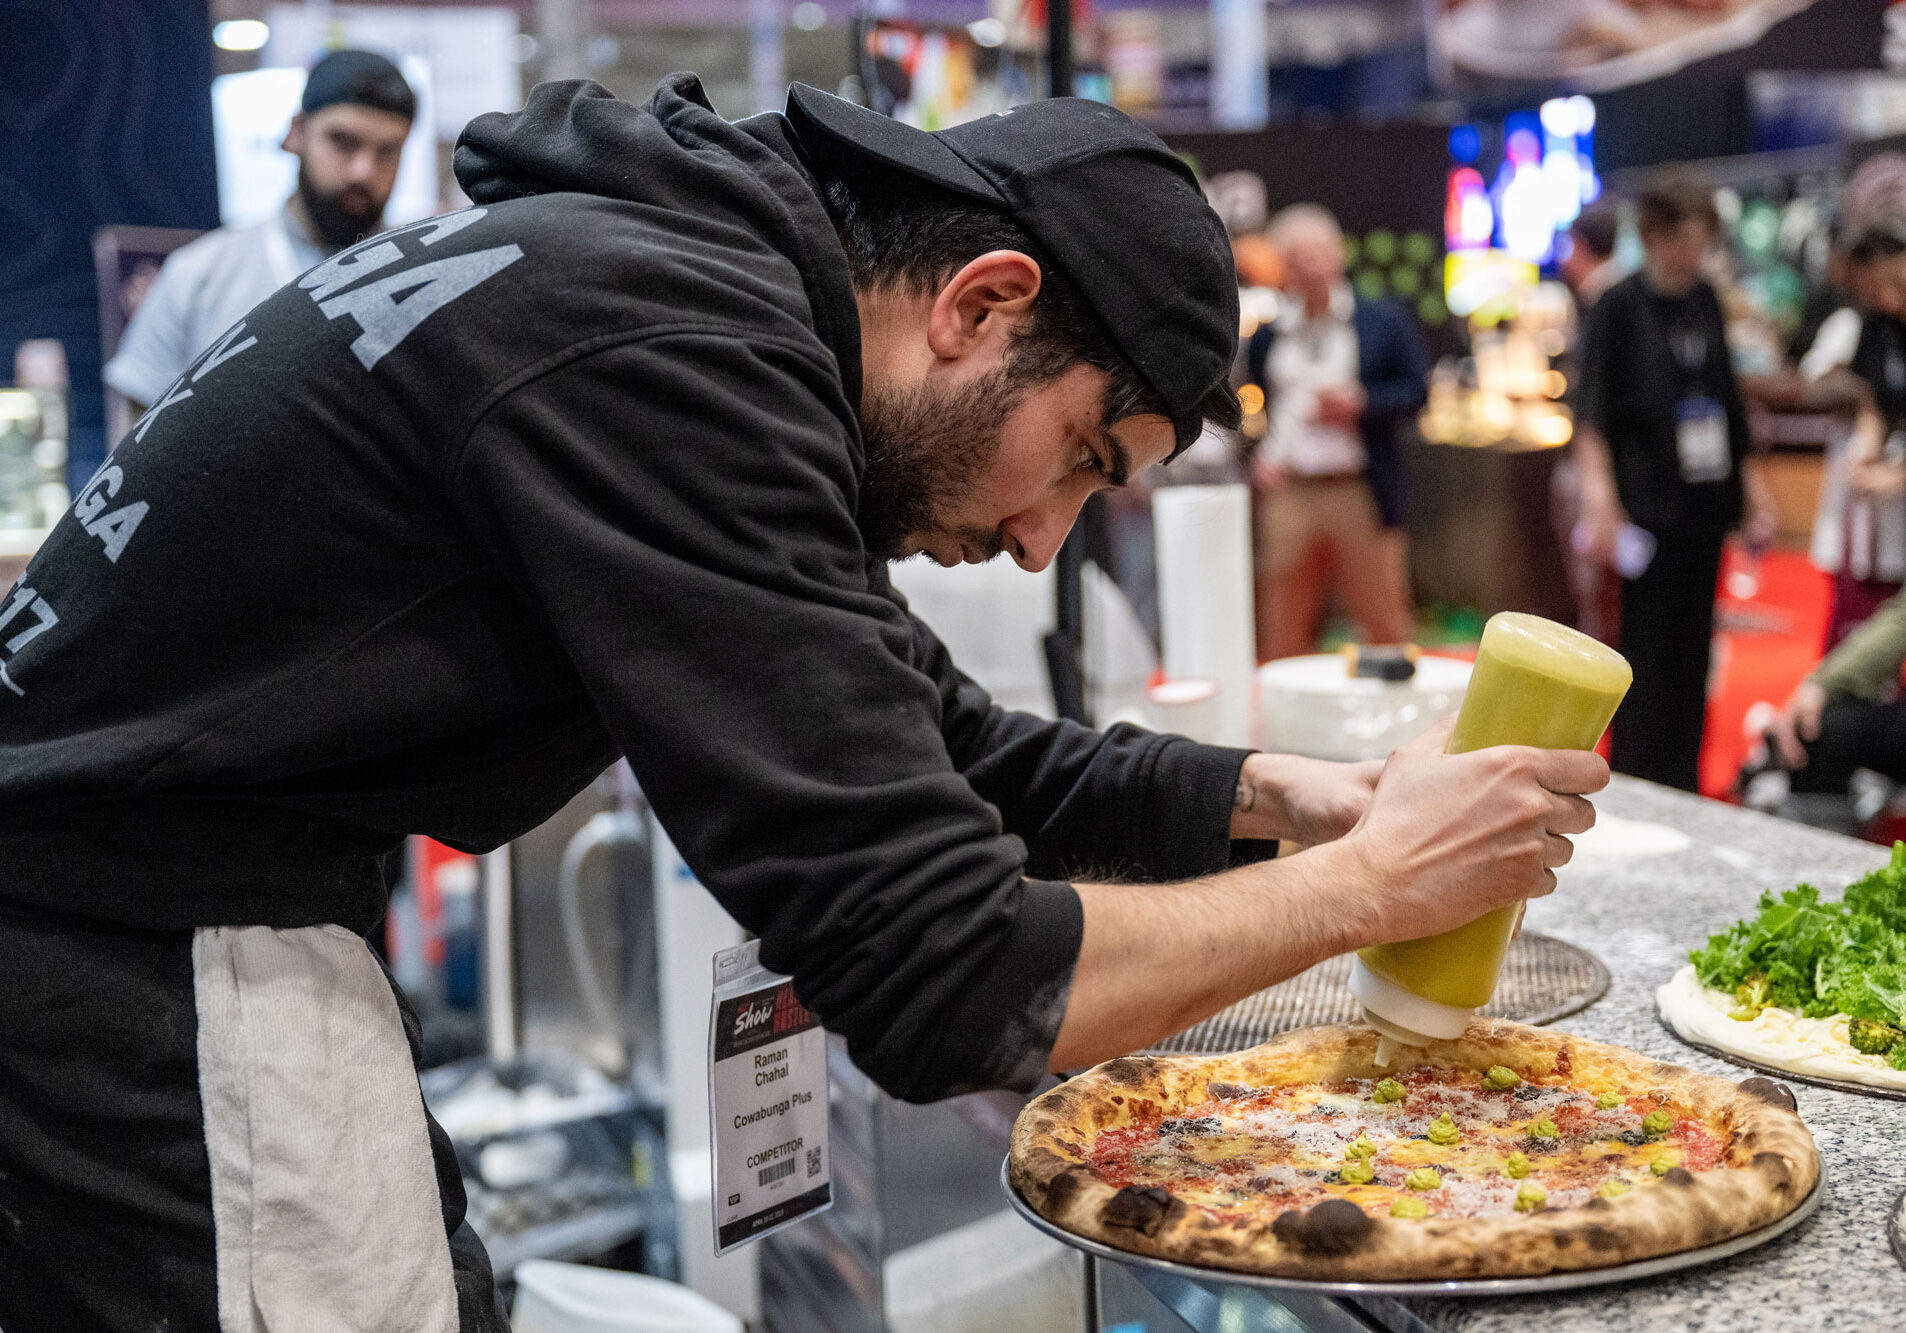 restaurants-canada-pizza-competition-6